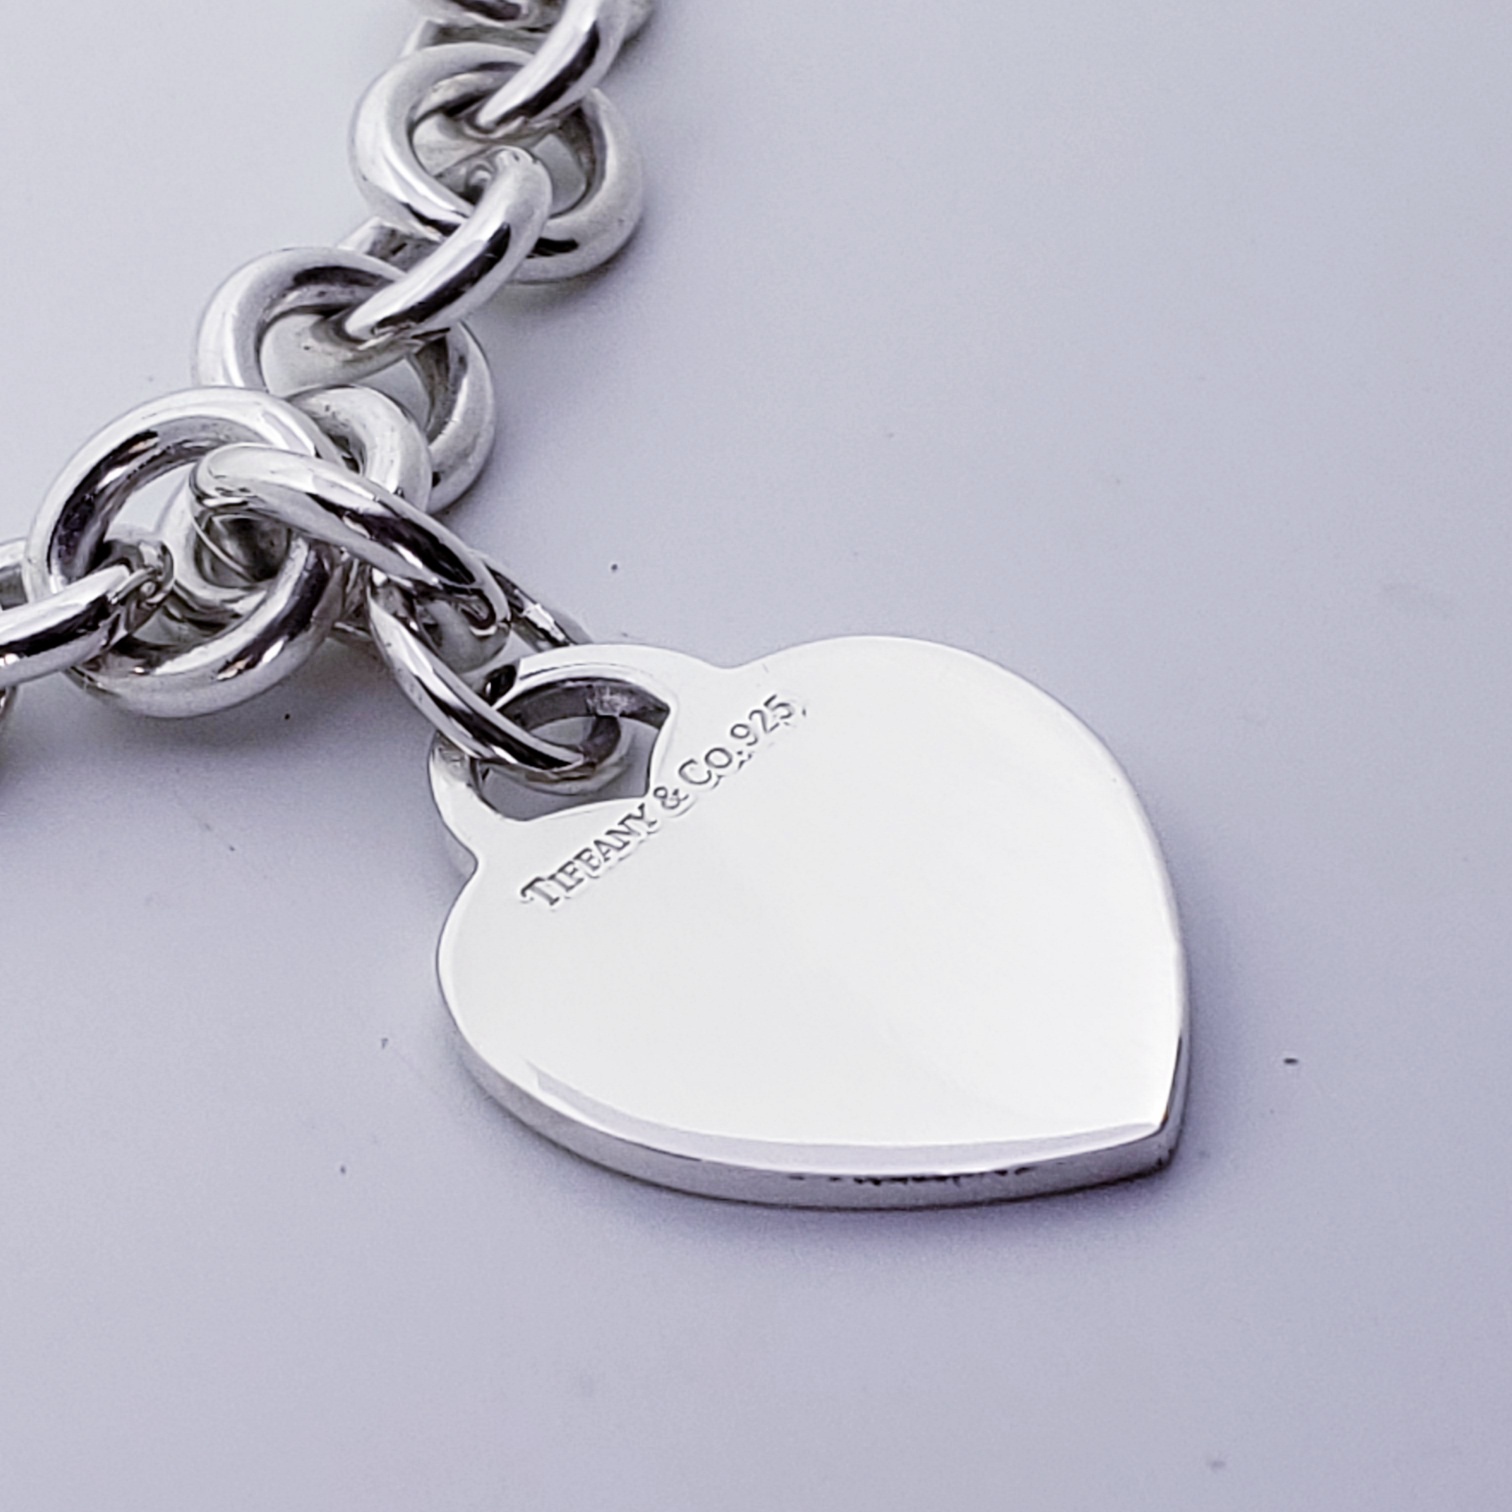 Tiffany & Co. - Sterling Silver Heart Charm Necklace 17